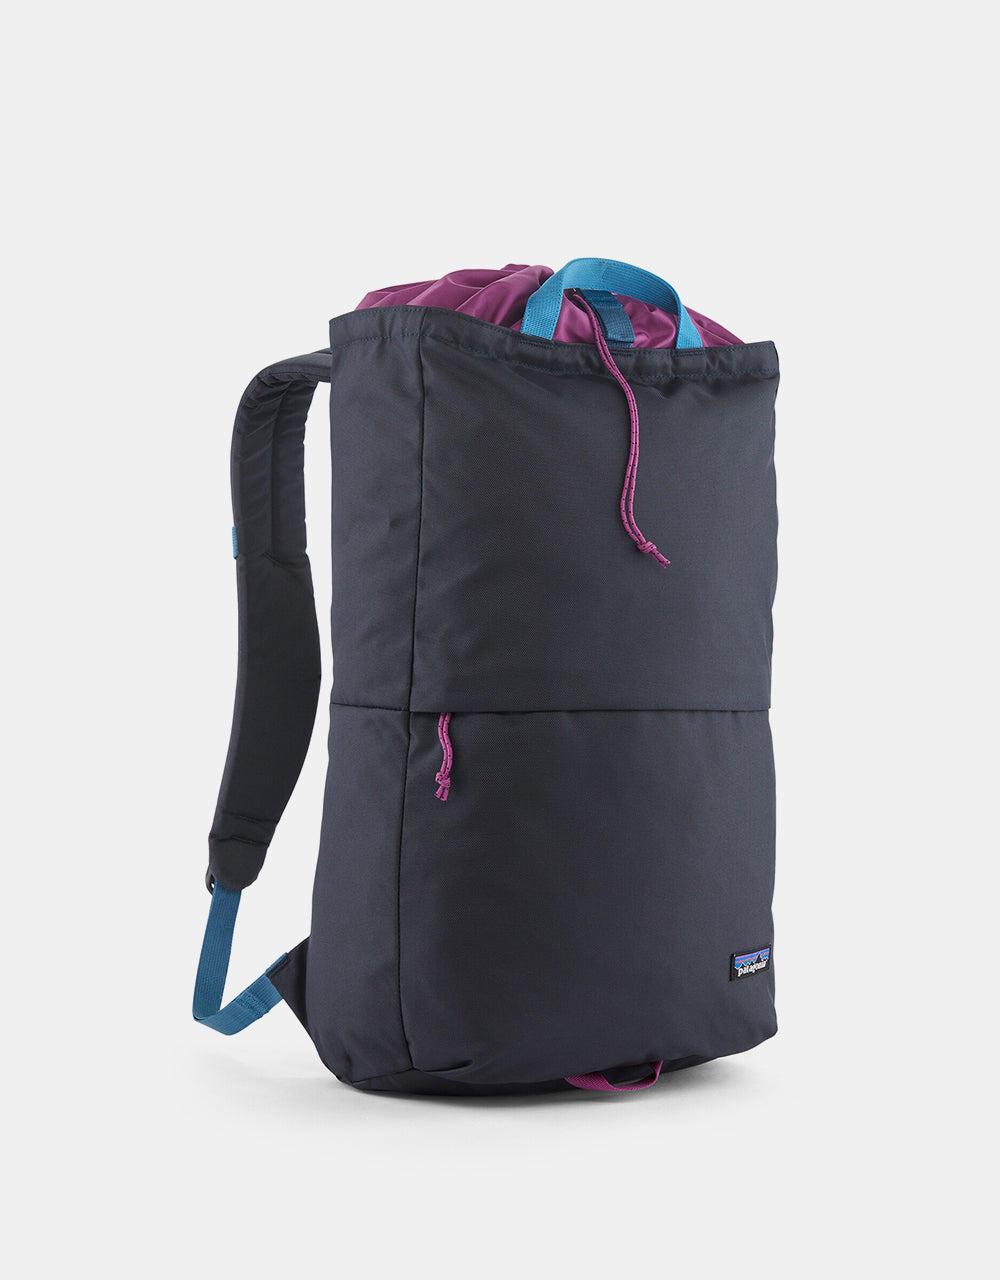 Patagonia Fieldsmith Linked Backpack - Pitch Blue